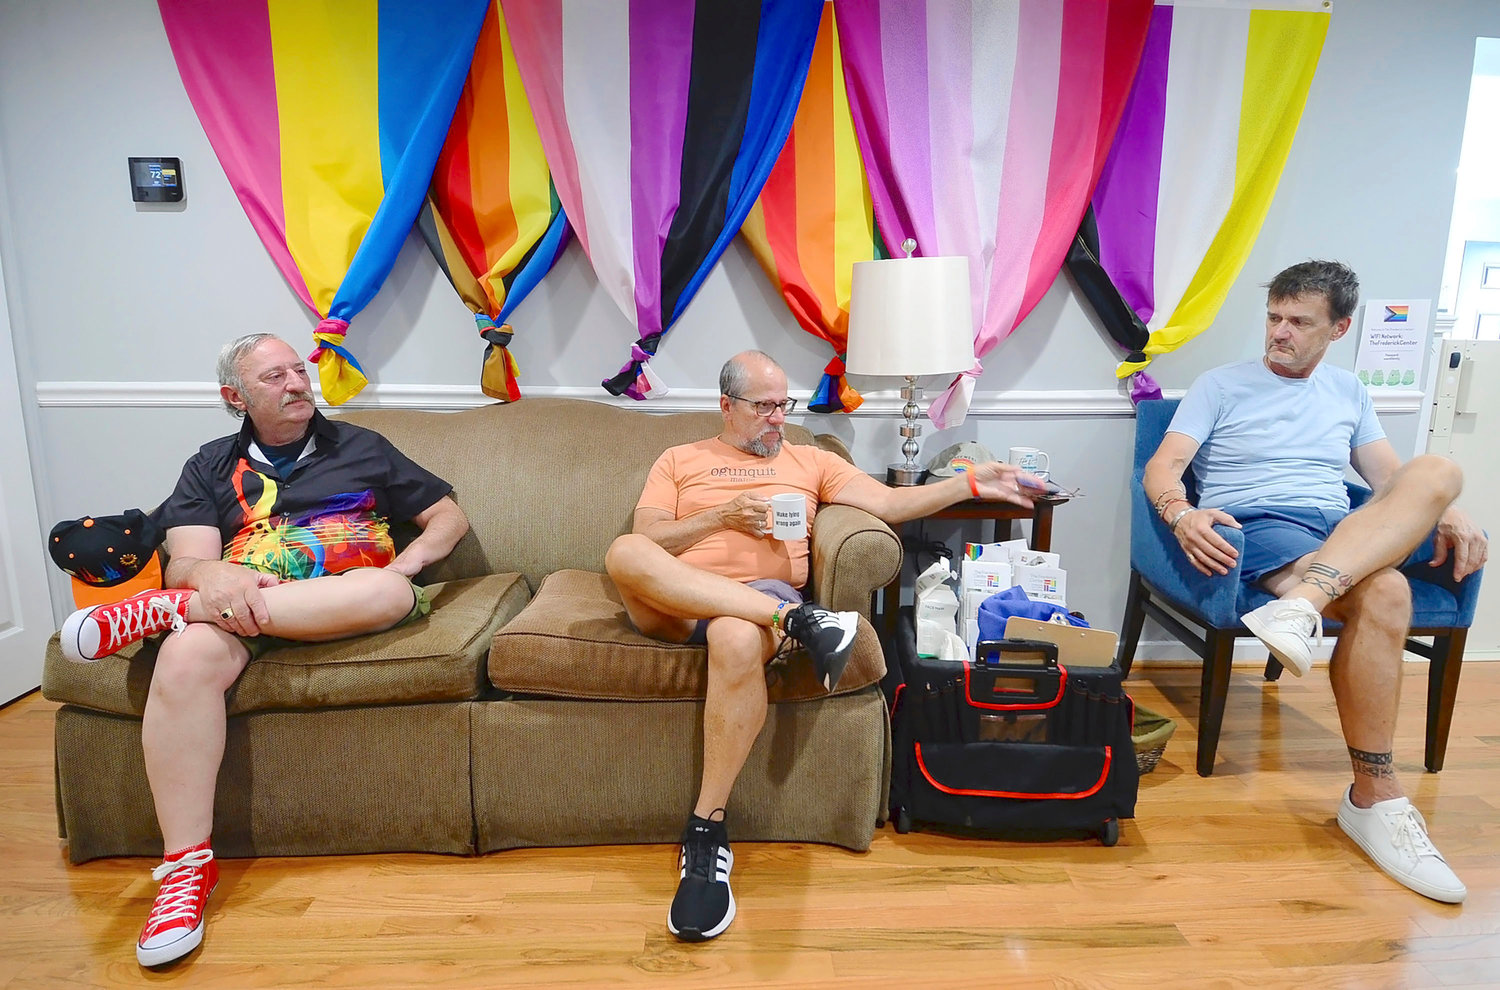 Stuart Harvey, middle, leads a support group meeting for the over 65 years and older LGBTQ community at the Frederick Center on July 13 in Frederick, Md. Listening in is Stephen Parnes, left, and Steven Gibson, right.